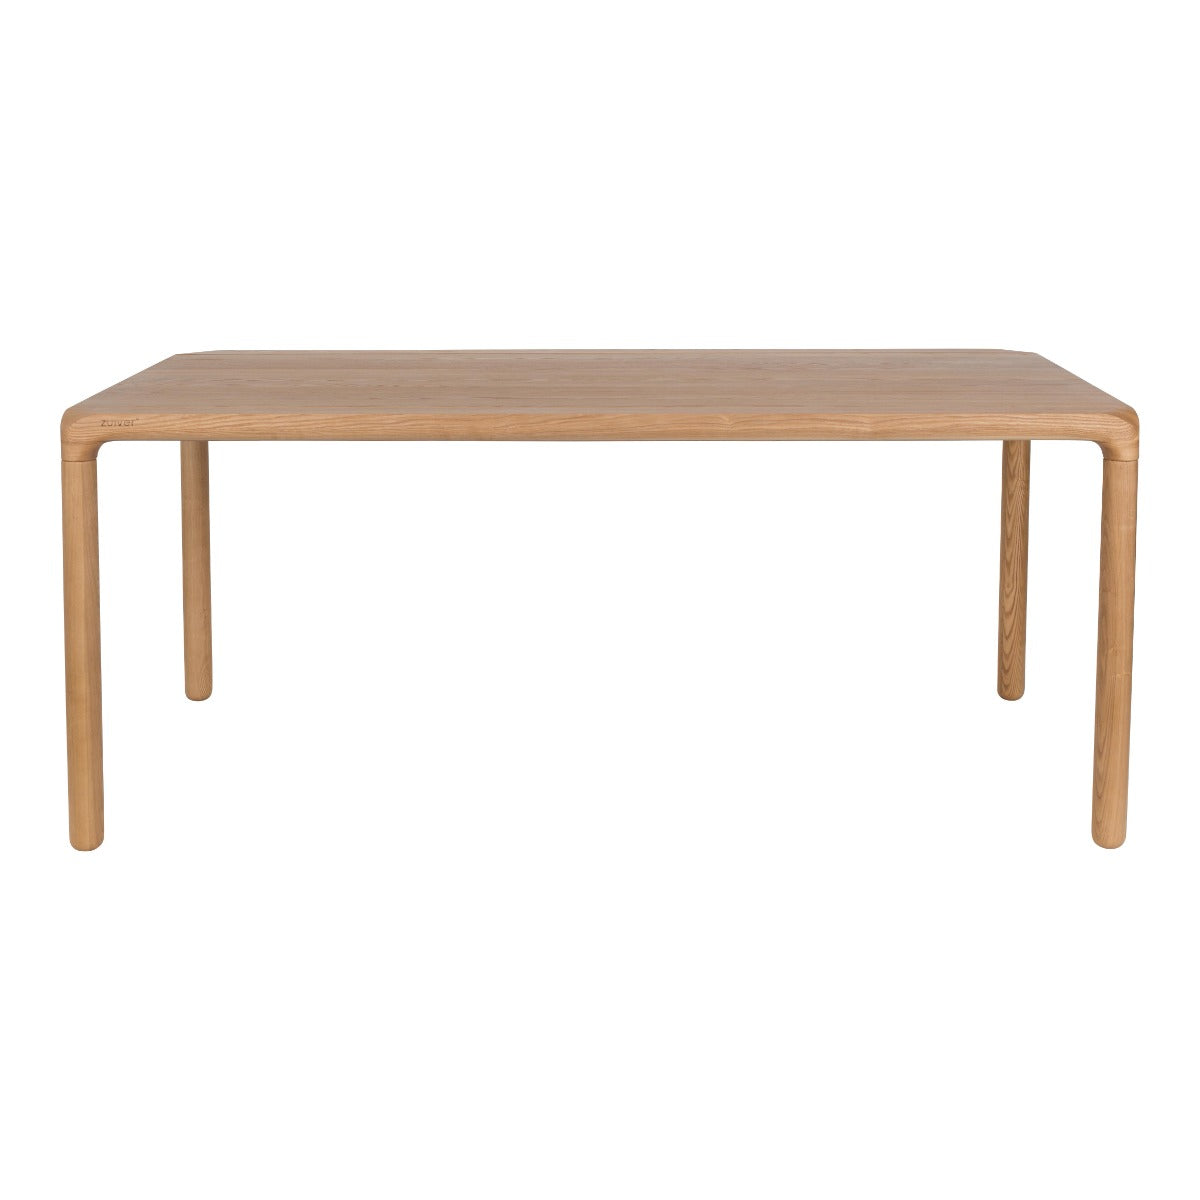 STORM table 180x90 wooden